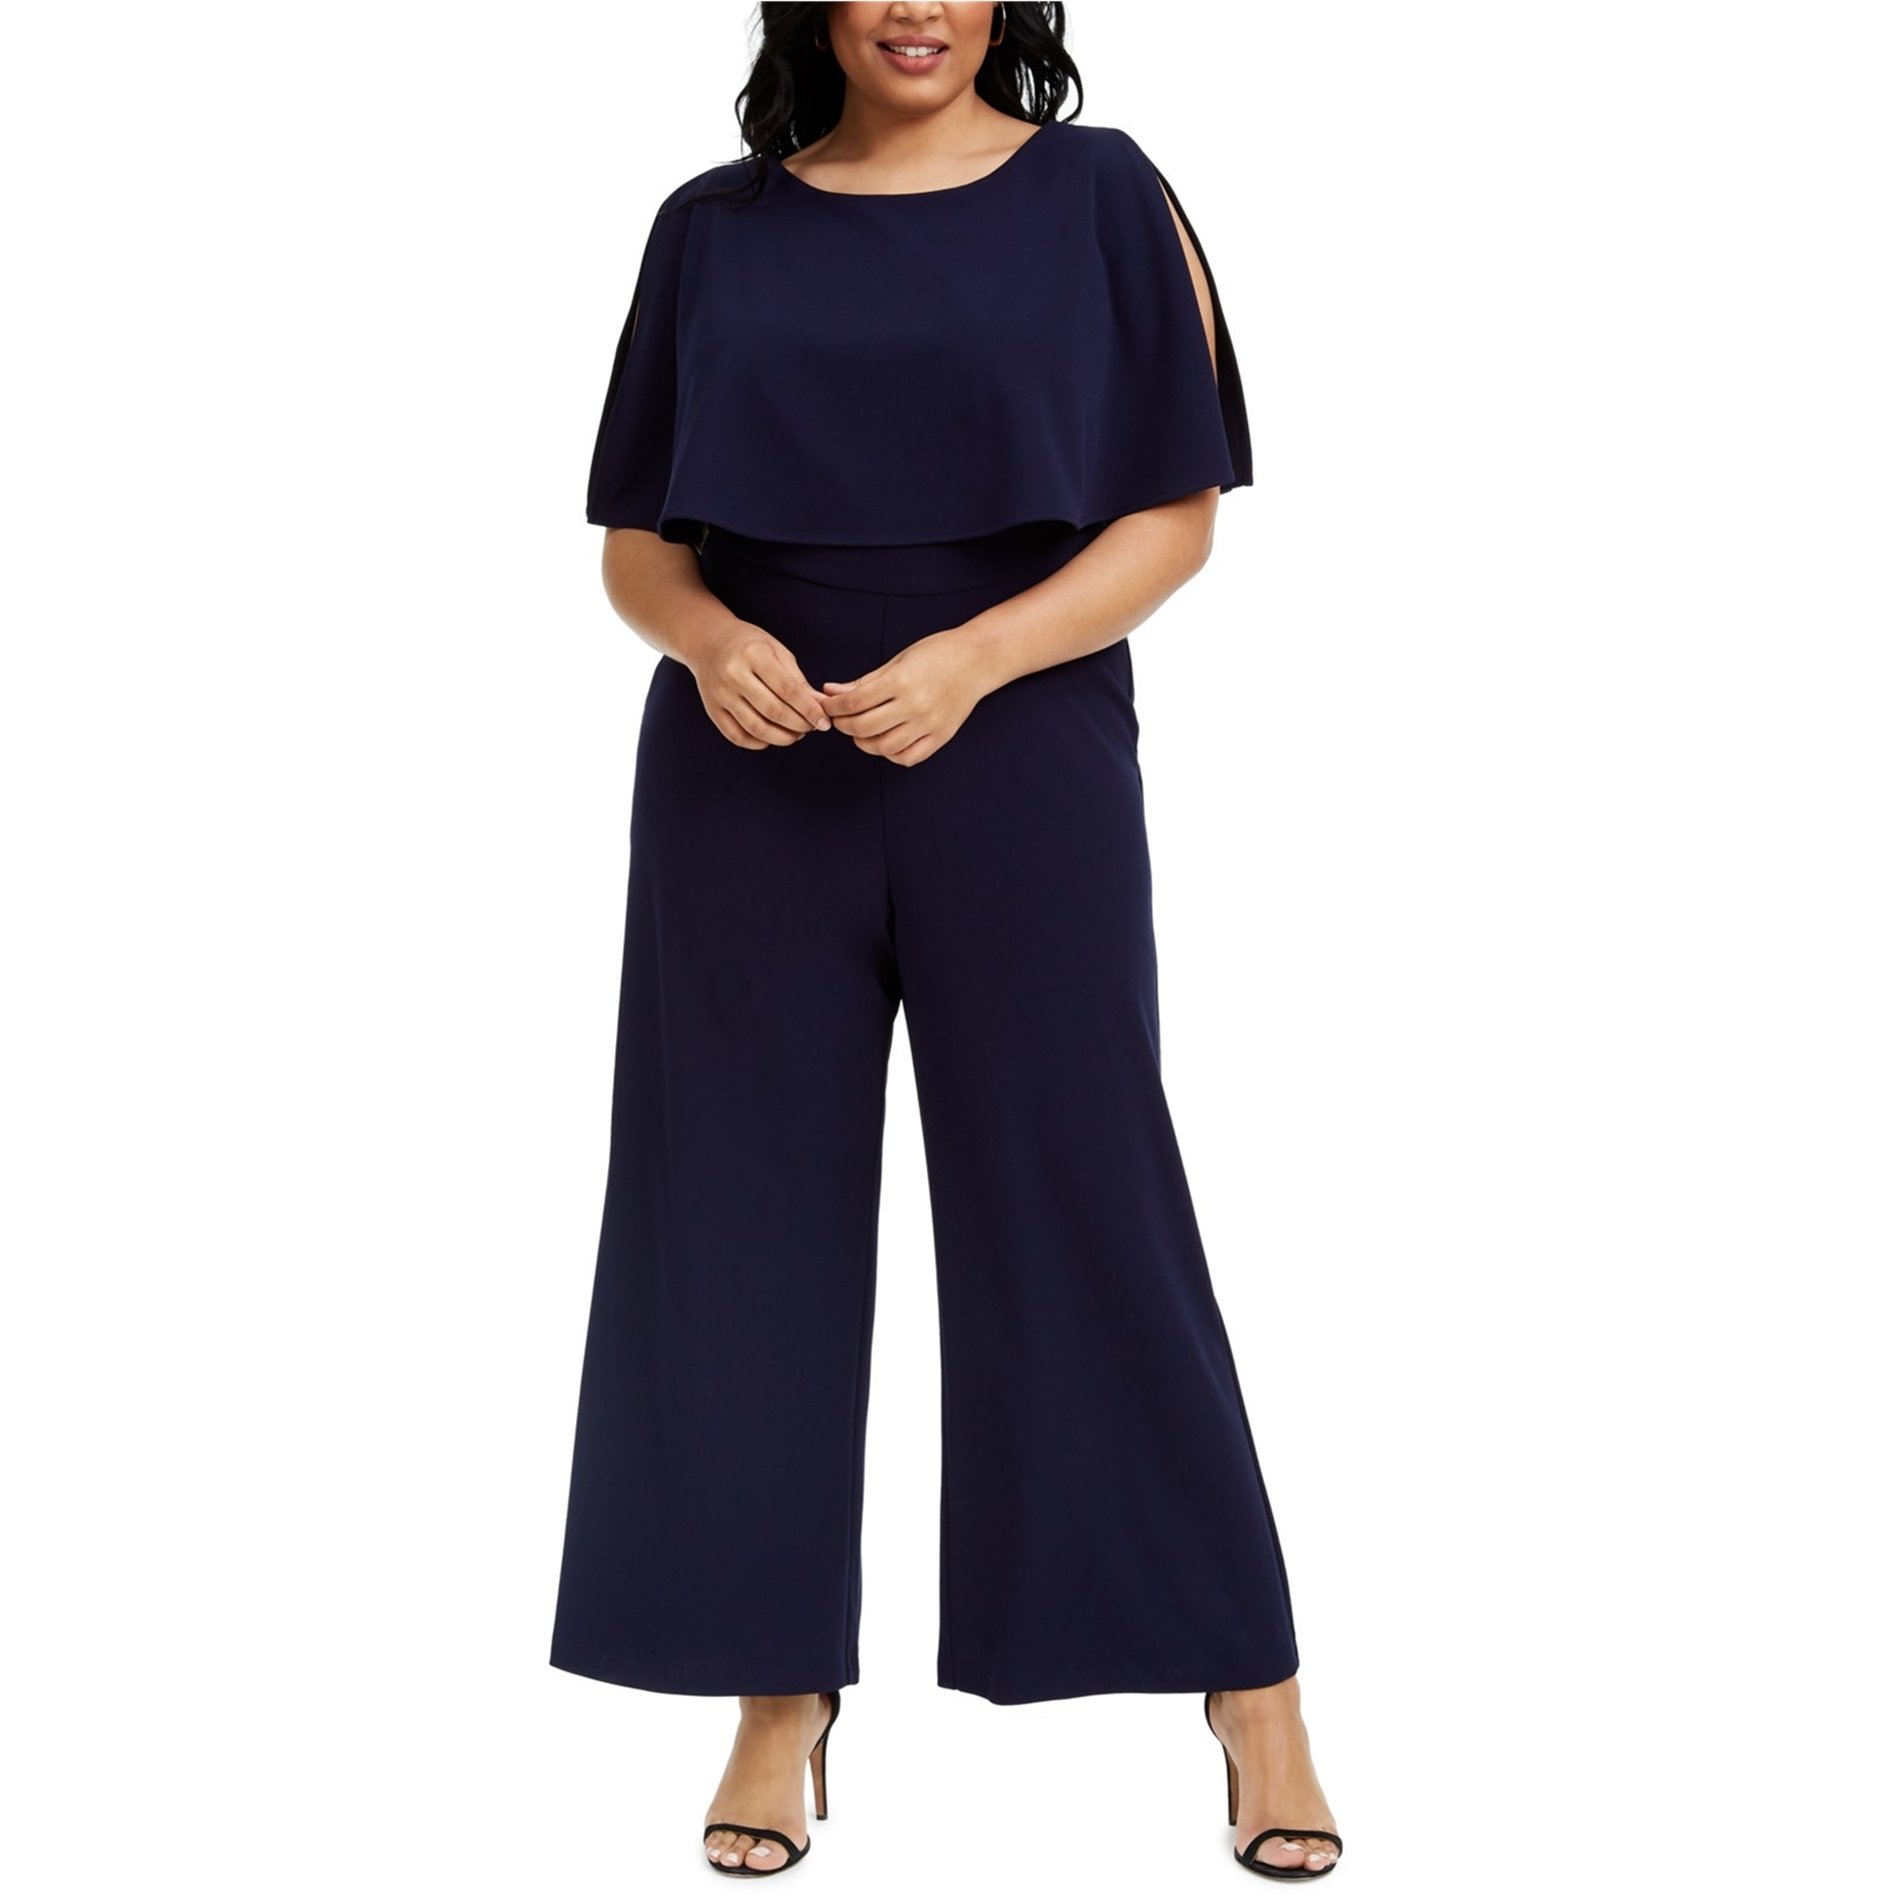 Connected Apparel Womens Solid Jumpsuit